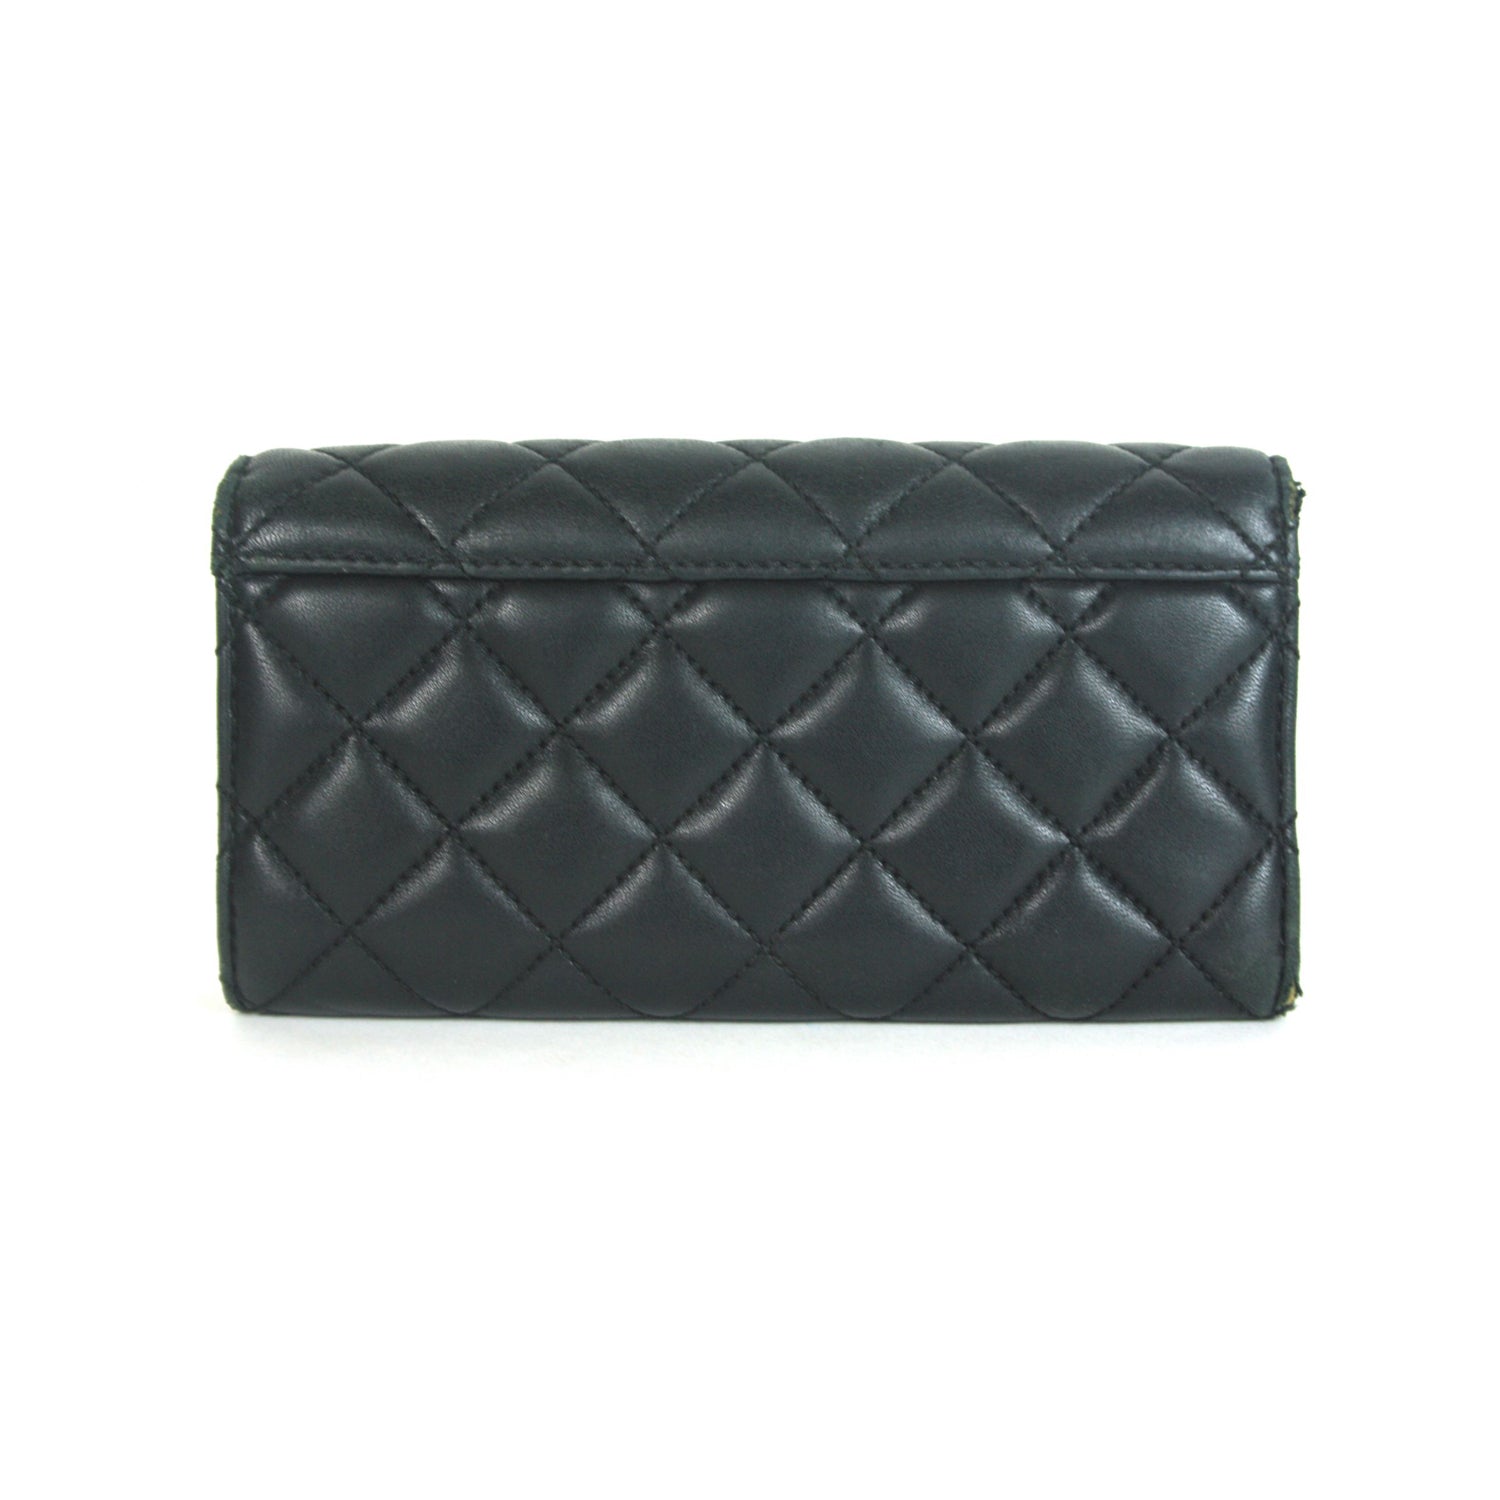 Carryall leather wallet